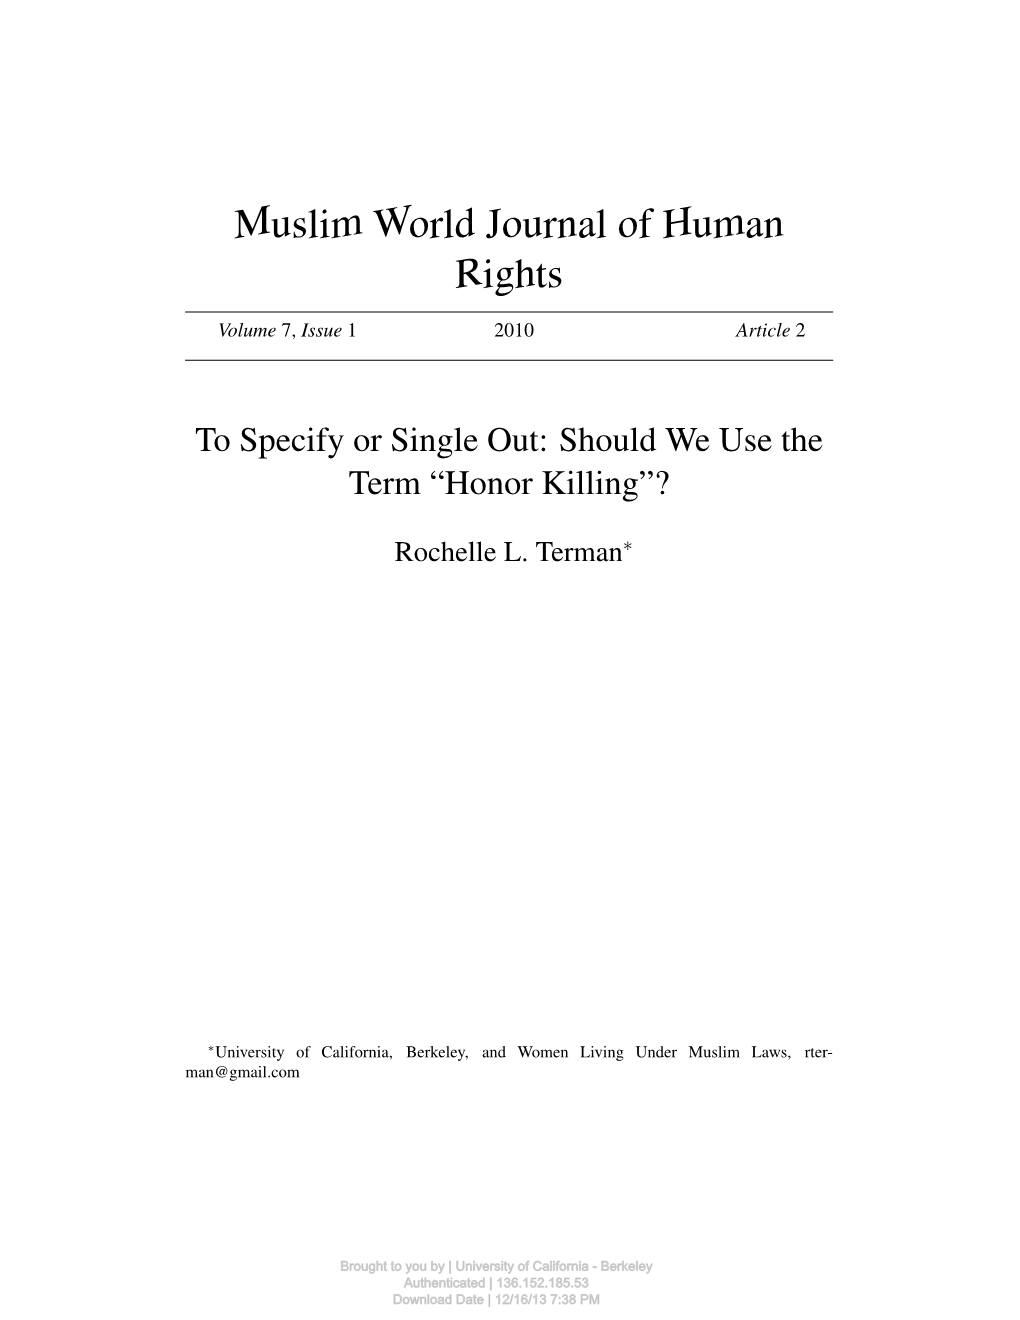 To Specify Or Single Out: Should We Use the Term "Honor Killing"?